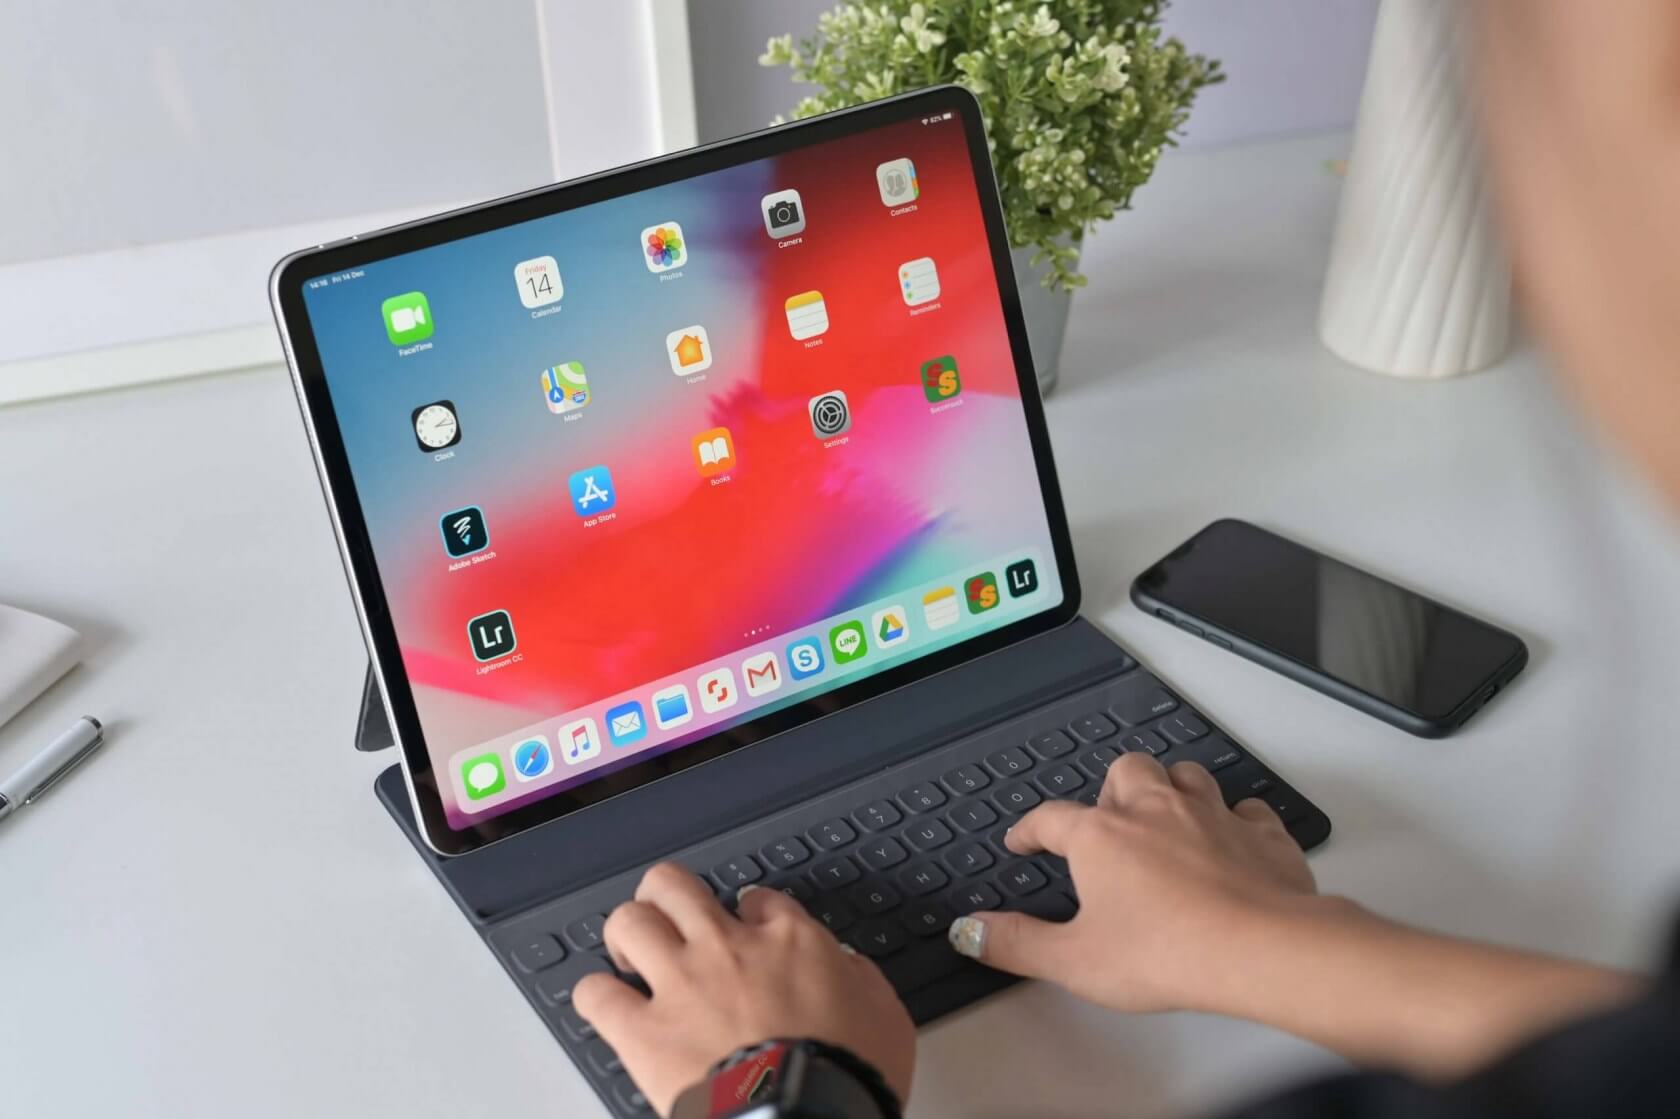 iPadOS 14 will reportedly include full mouse cursor support